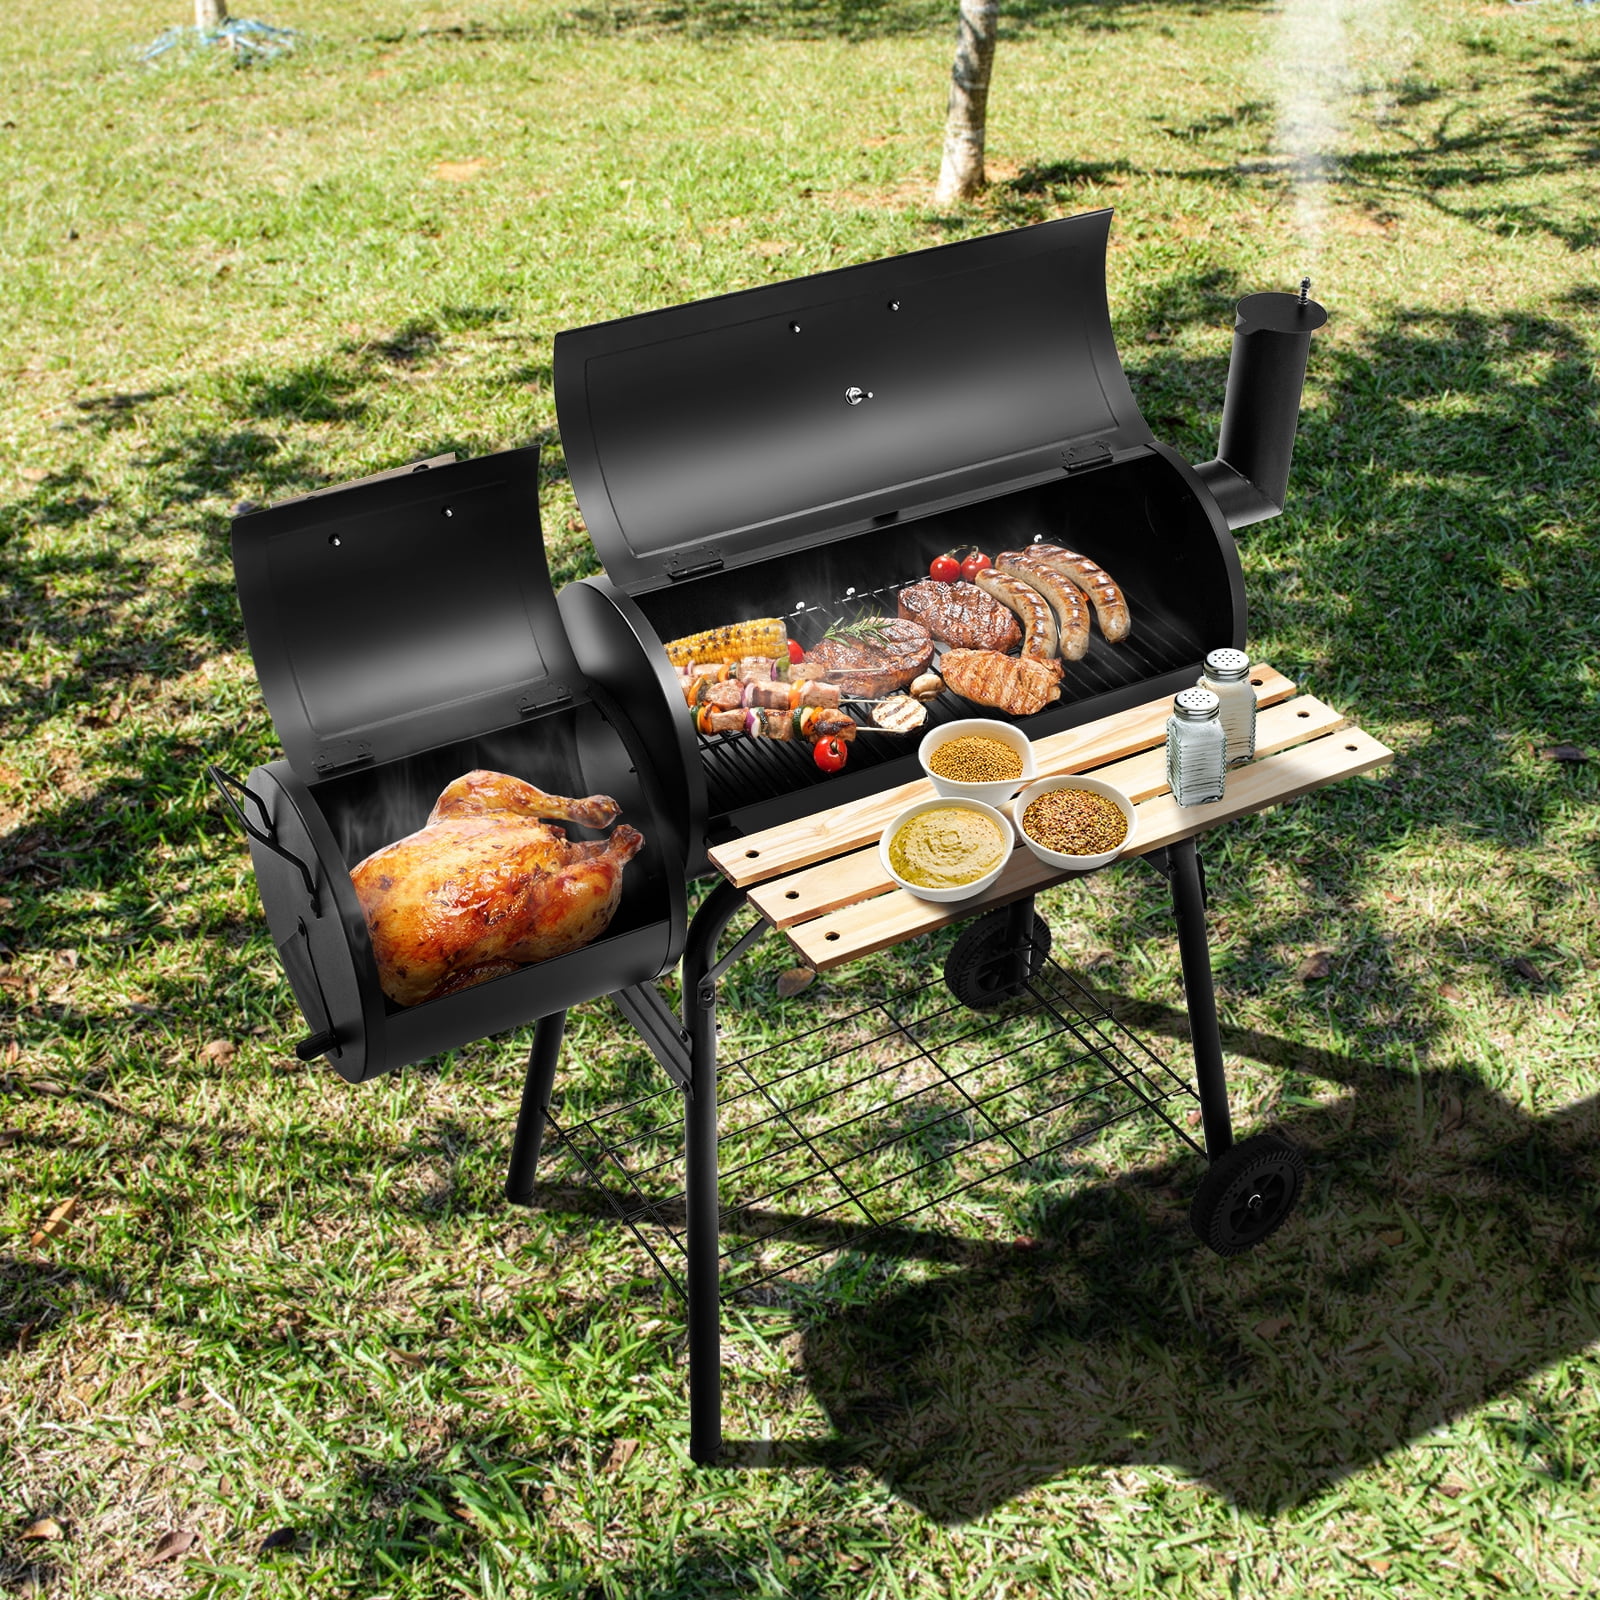 Vebreda Outdoor BBQ Grill Charcoal Barbecue Pit Backyard Meat Cooker Smoker